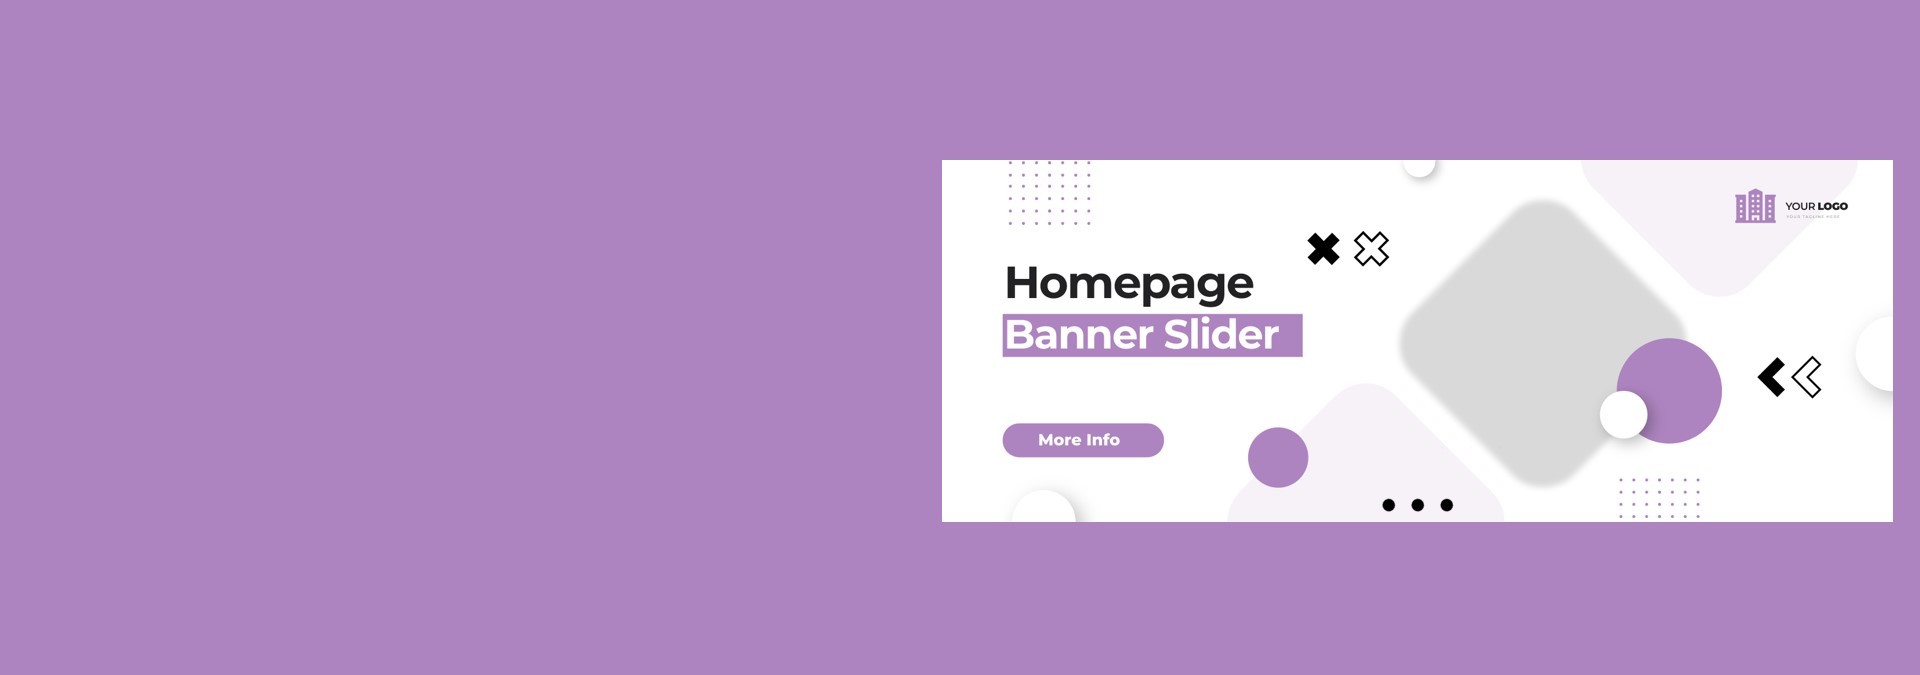 How Homepage Banner Sliders Can Help You Promote Your Brand Better